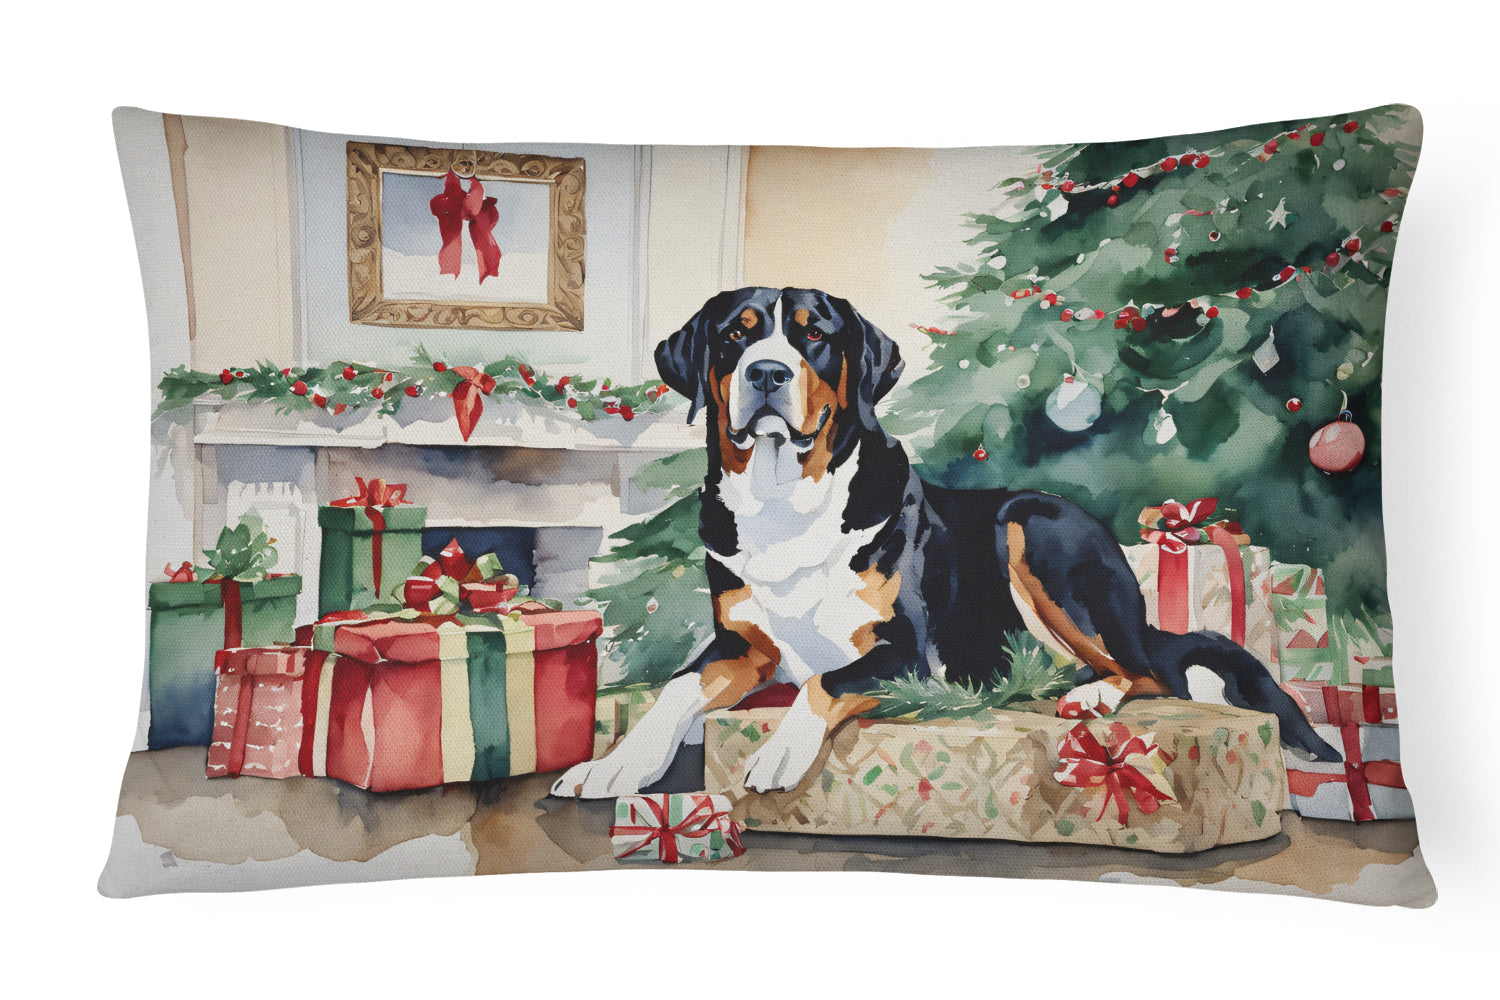 Buy this Greater Swiss Mountain Dog Cozy Christmas Throw Pillow